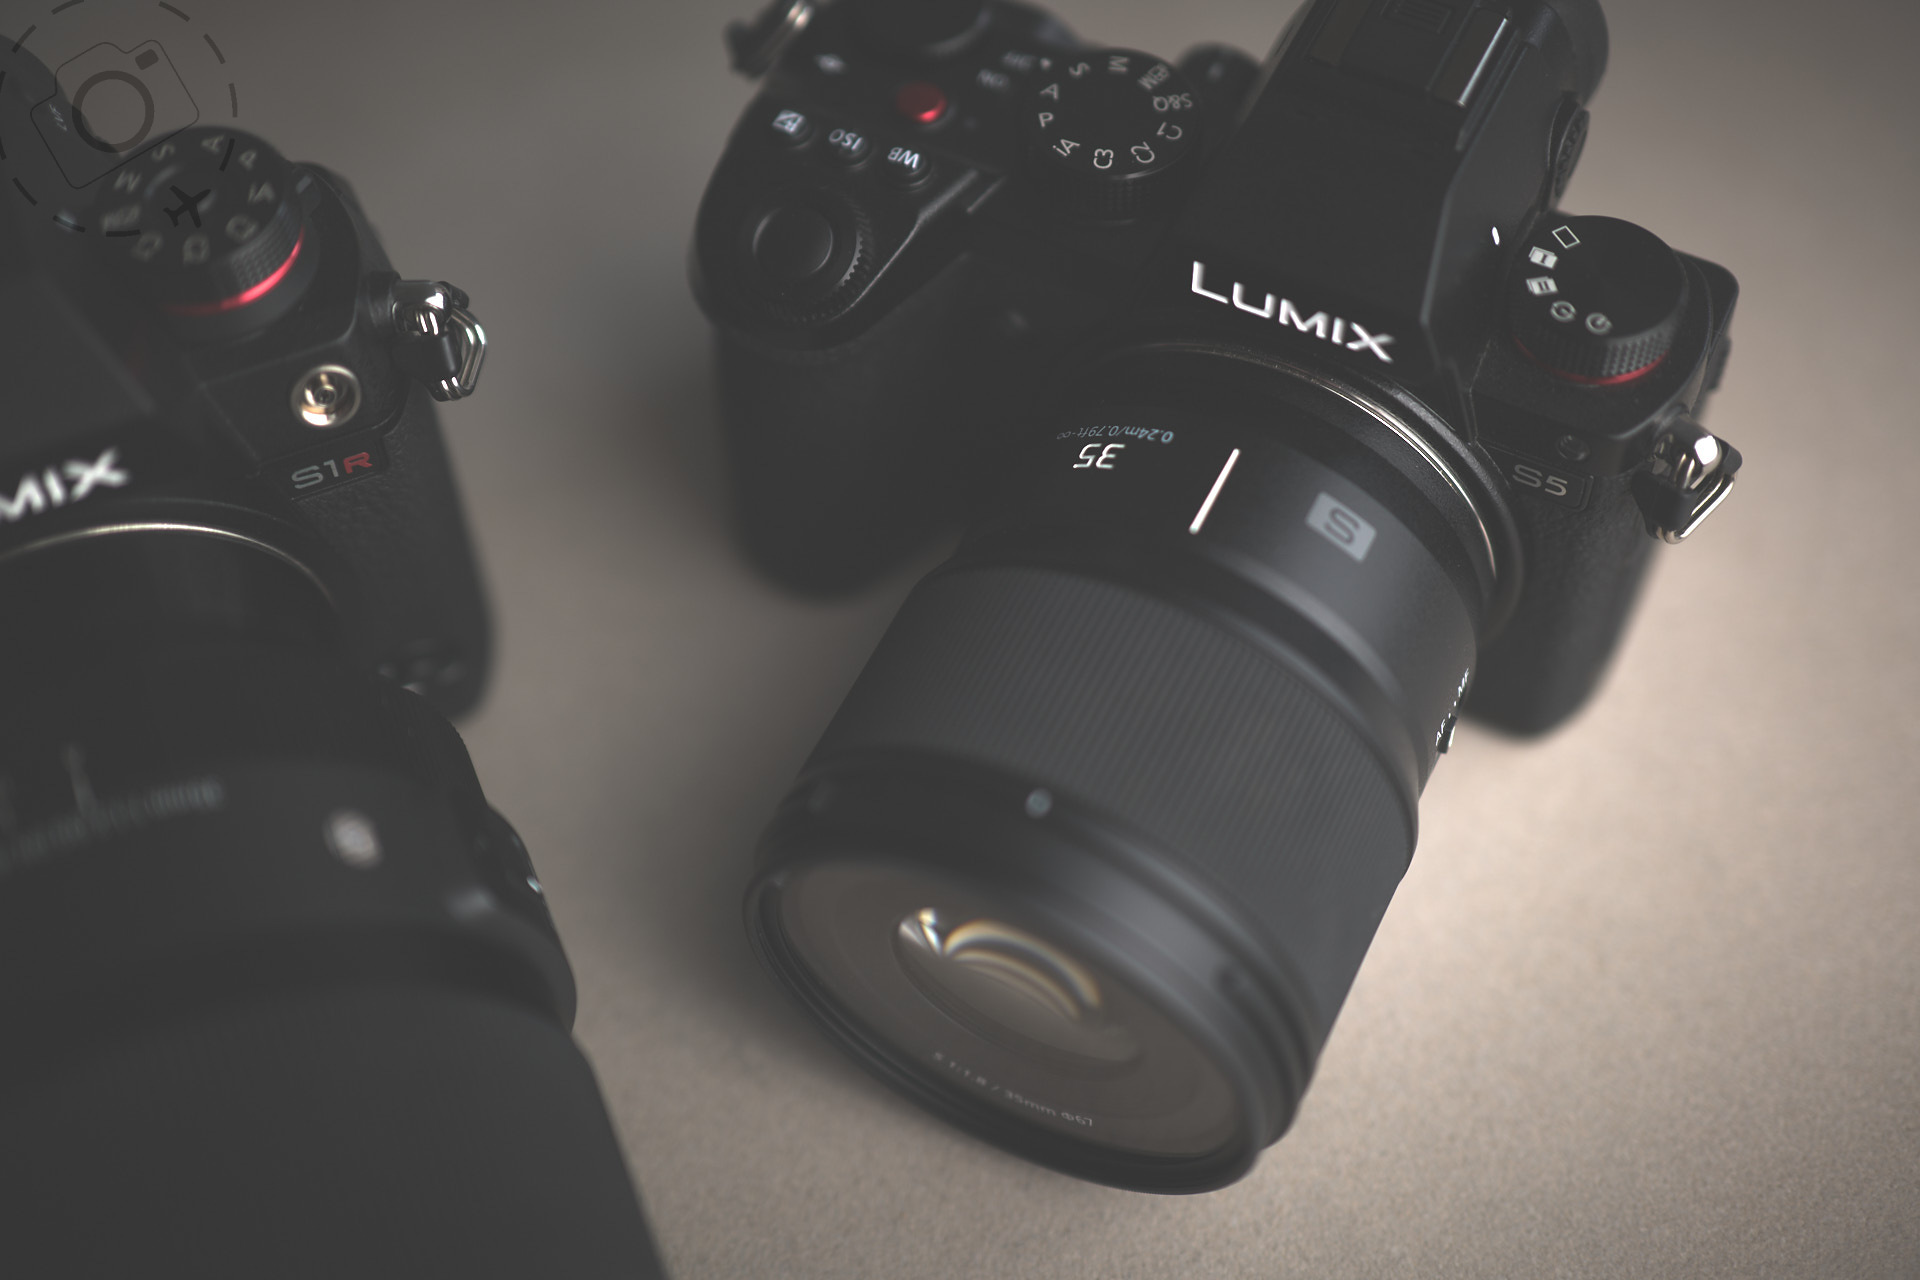 The Best 35mm Lens for My LUMIX